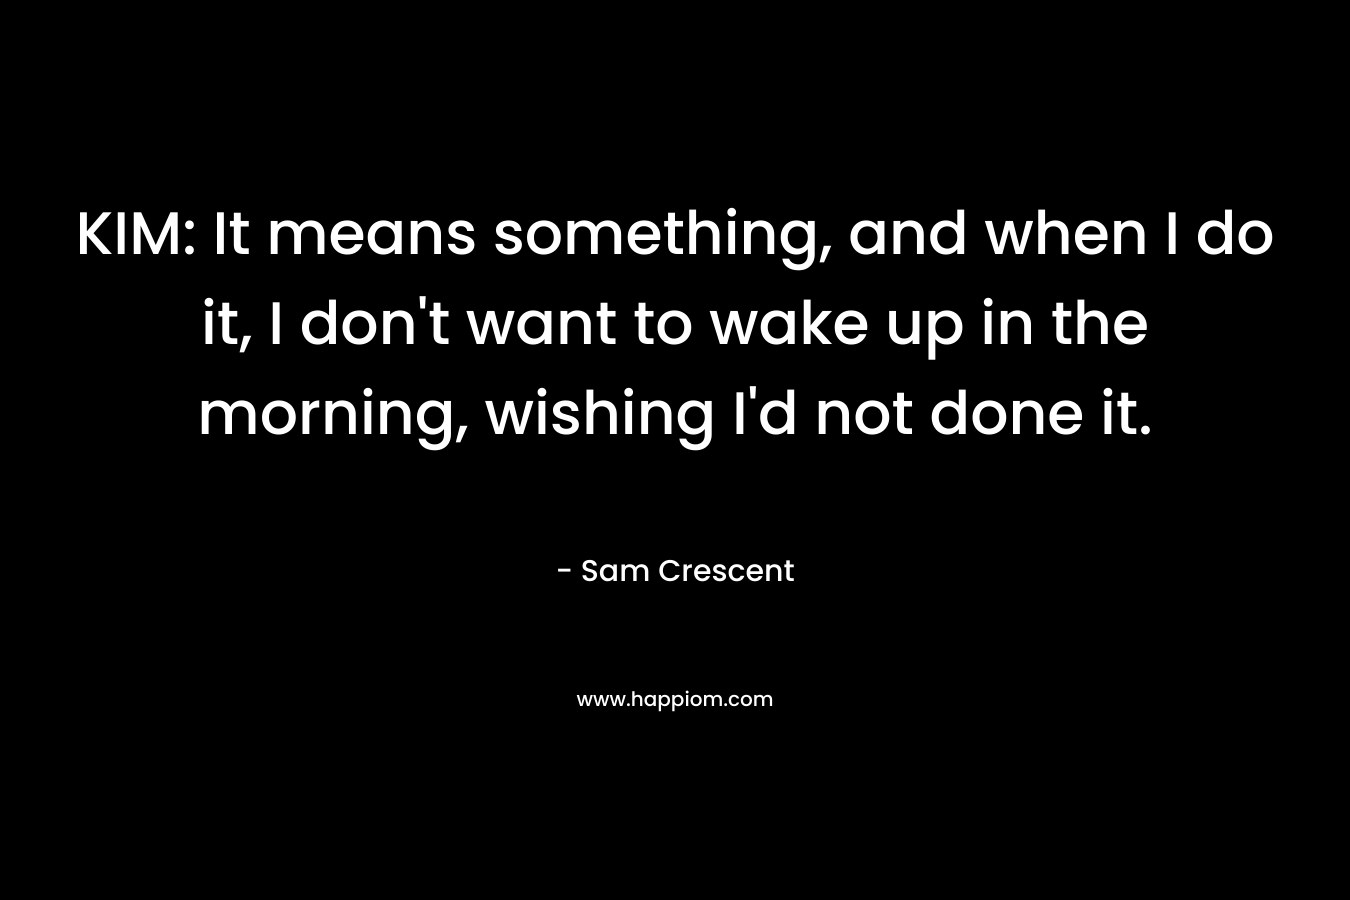 KIM: It means something, and when I do it, I don’t want to wake up in the morning, wishing I’d not done it. – Sam Crescent